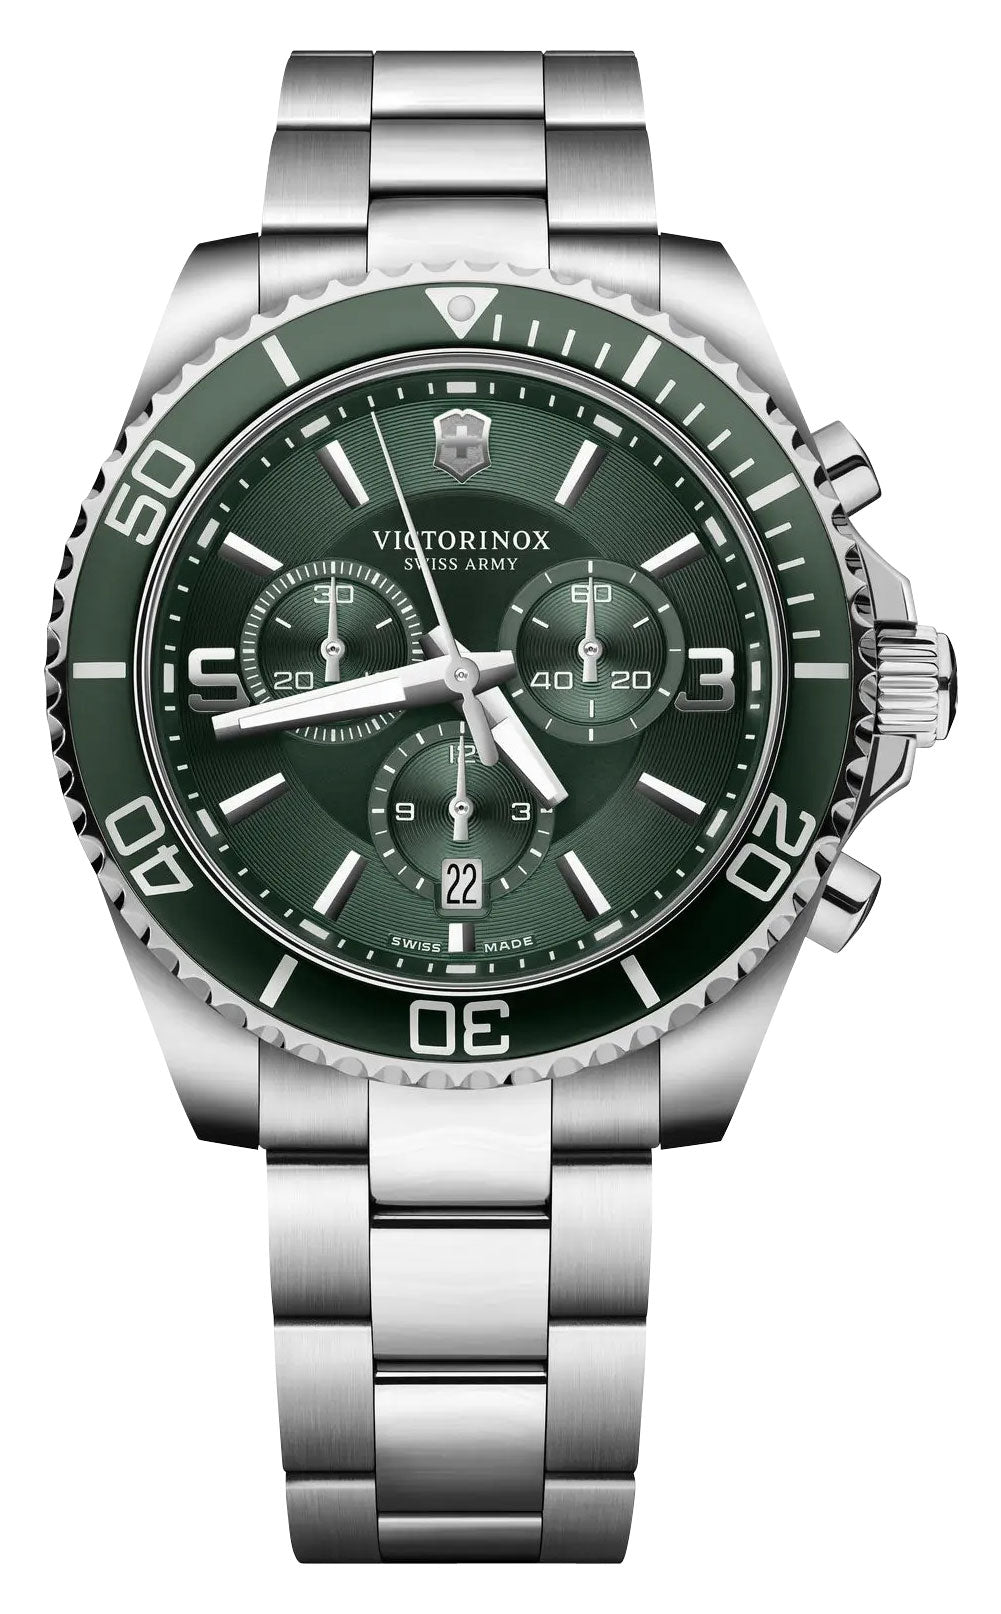 update alt-text with template Watches - Mens-Victorinox Swiss Army-241946-12-hour display, 40 - 45 mm, chronograph, date, green, Maverick, mens, menswatches, new arrivals, round, rpSKU_241689, rpSKU_241692, rpSKU_241695, rpSKU_241791, rpSKU_241797, seconds sub-dial, stainless steel band, stainless steel case, swiss quartz, uni-directional rotating bezel, Victorinox Swiss Army, watches-Watches & Beyond